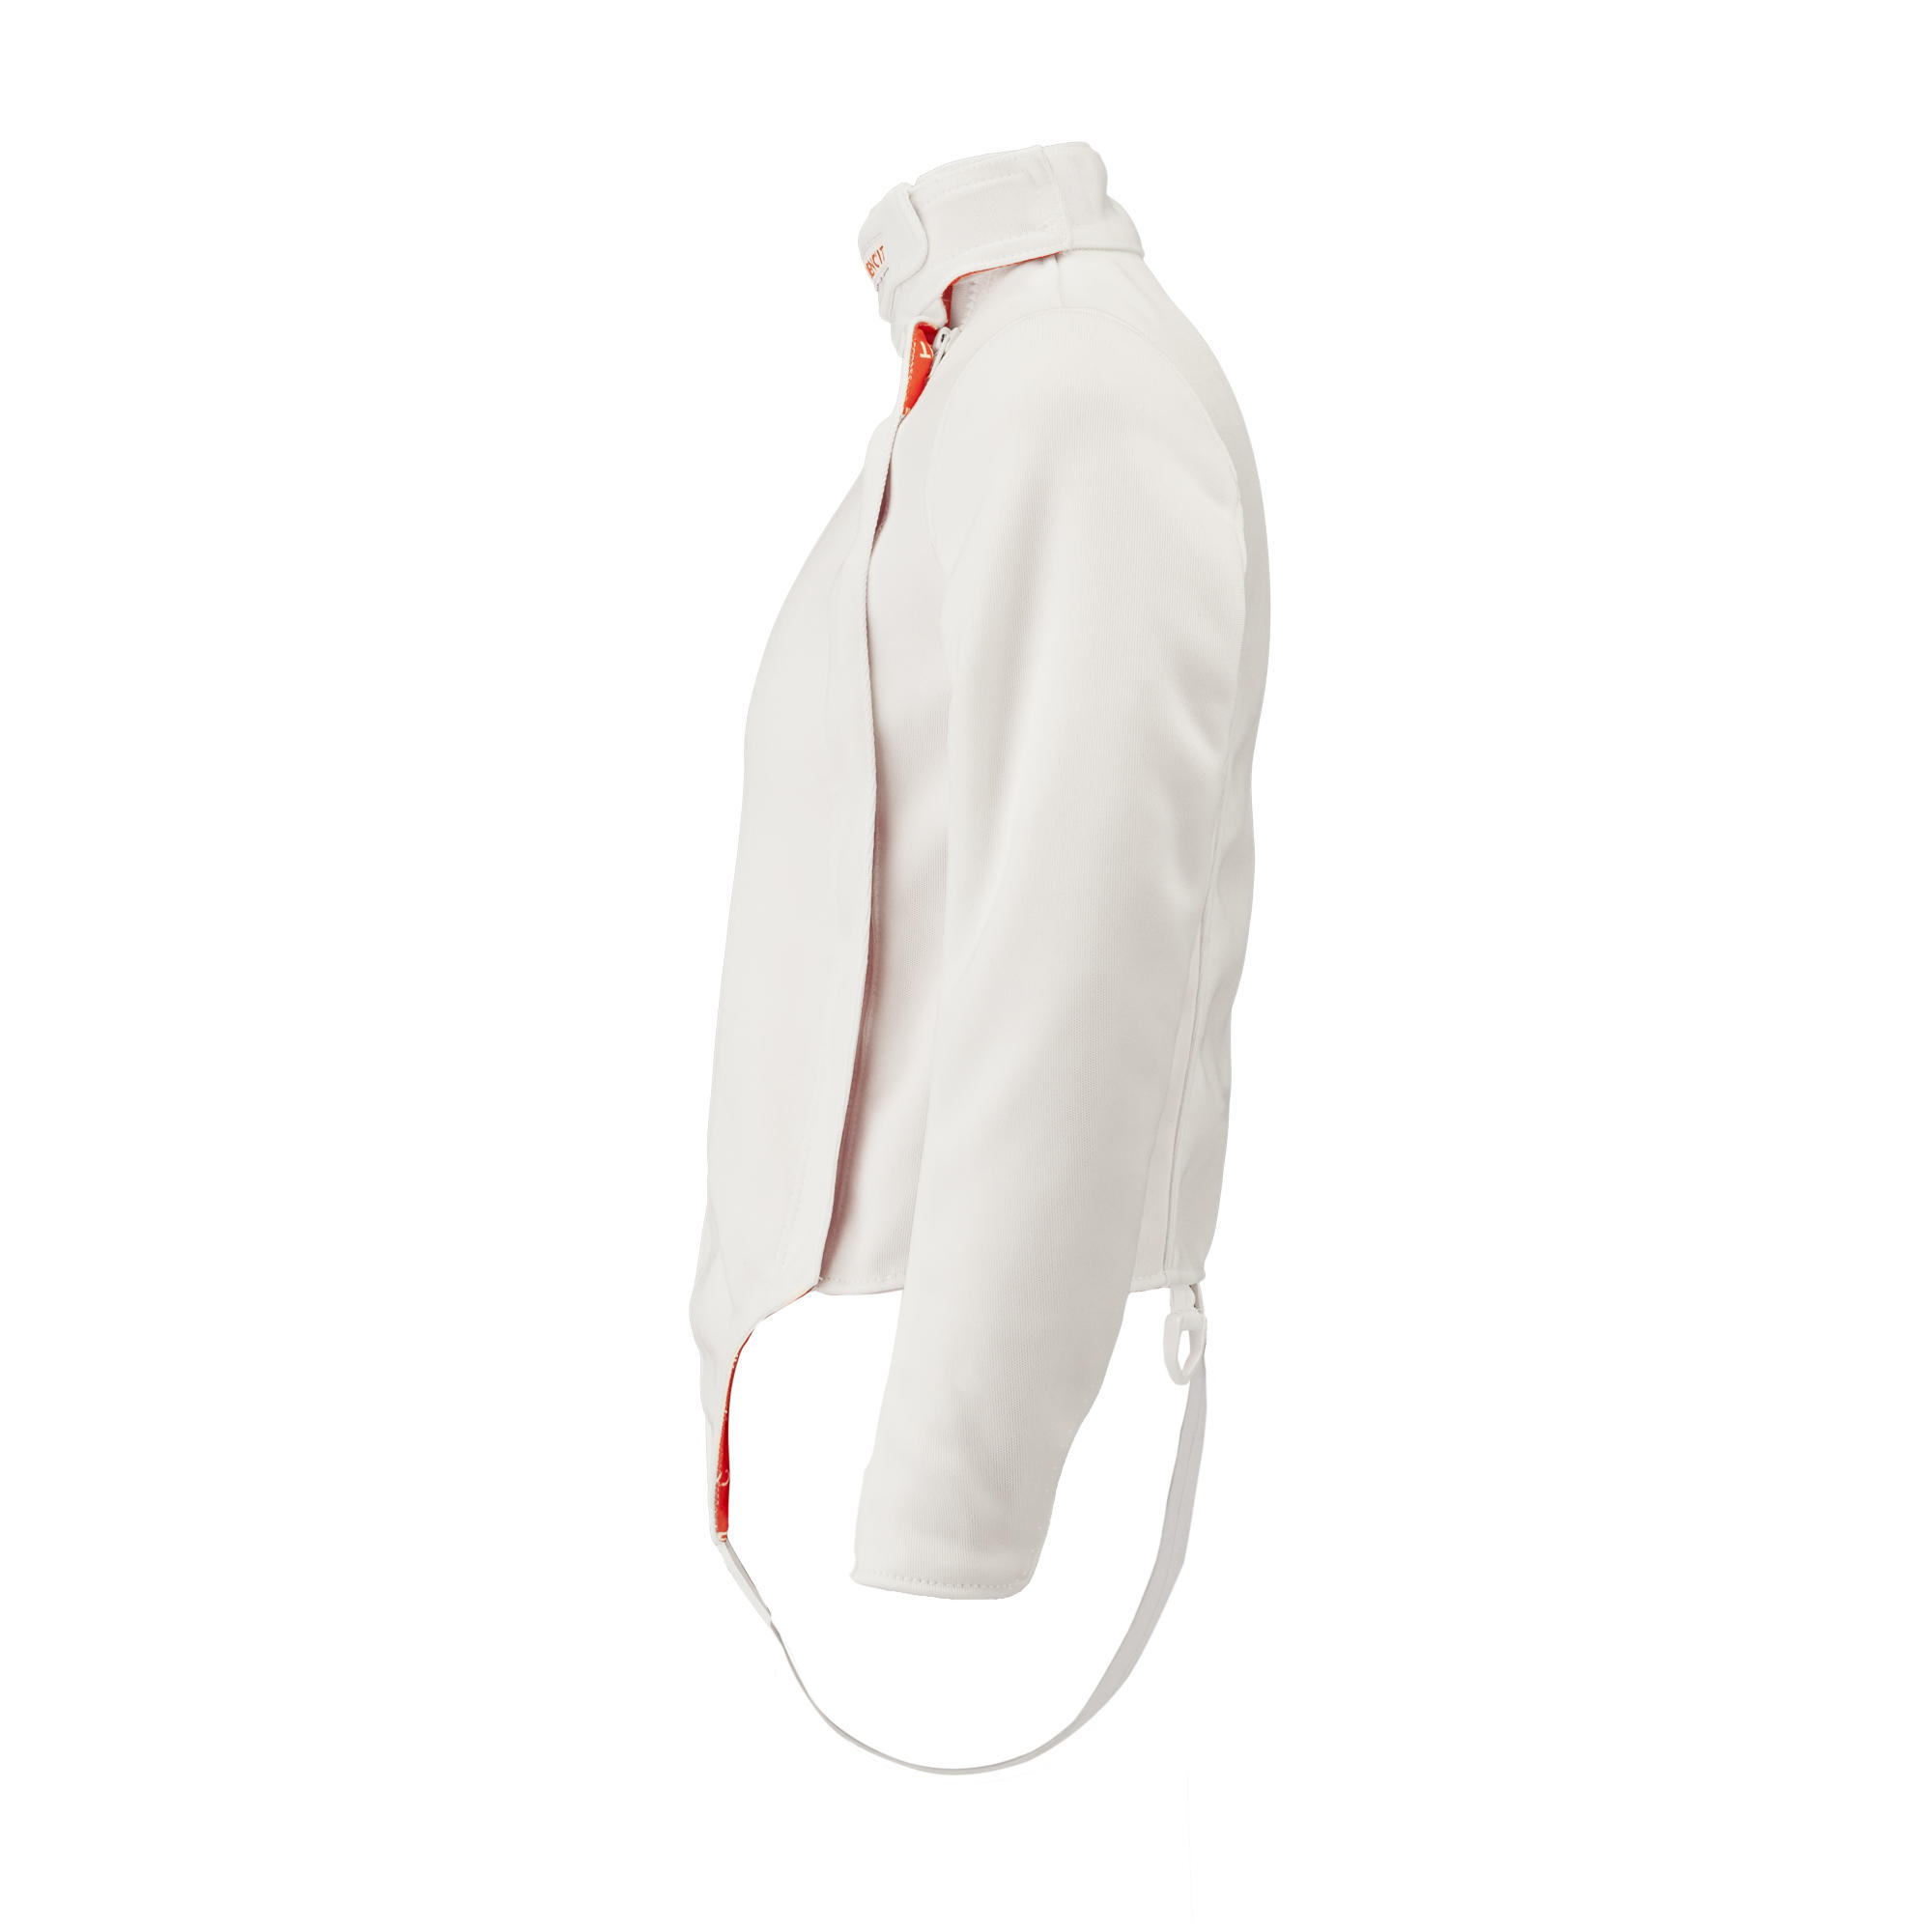 Kids' Right-Handed Fencing Jacket 350N 3/5